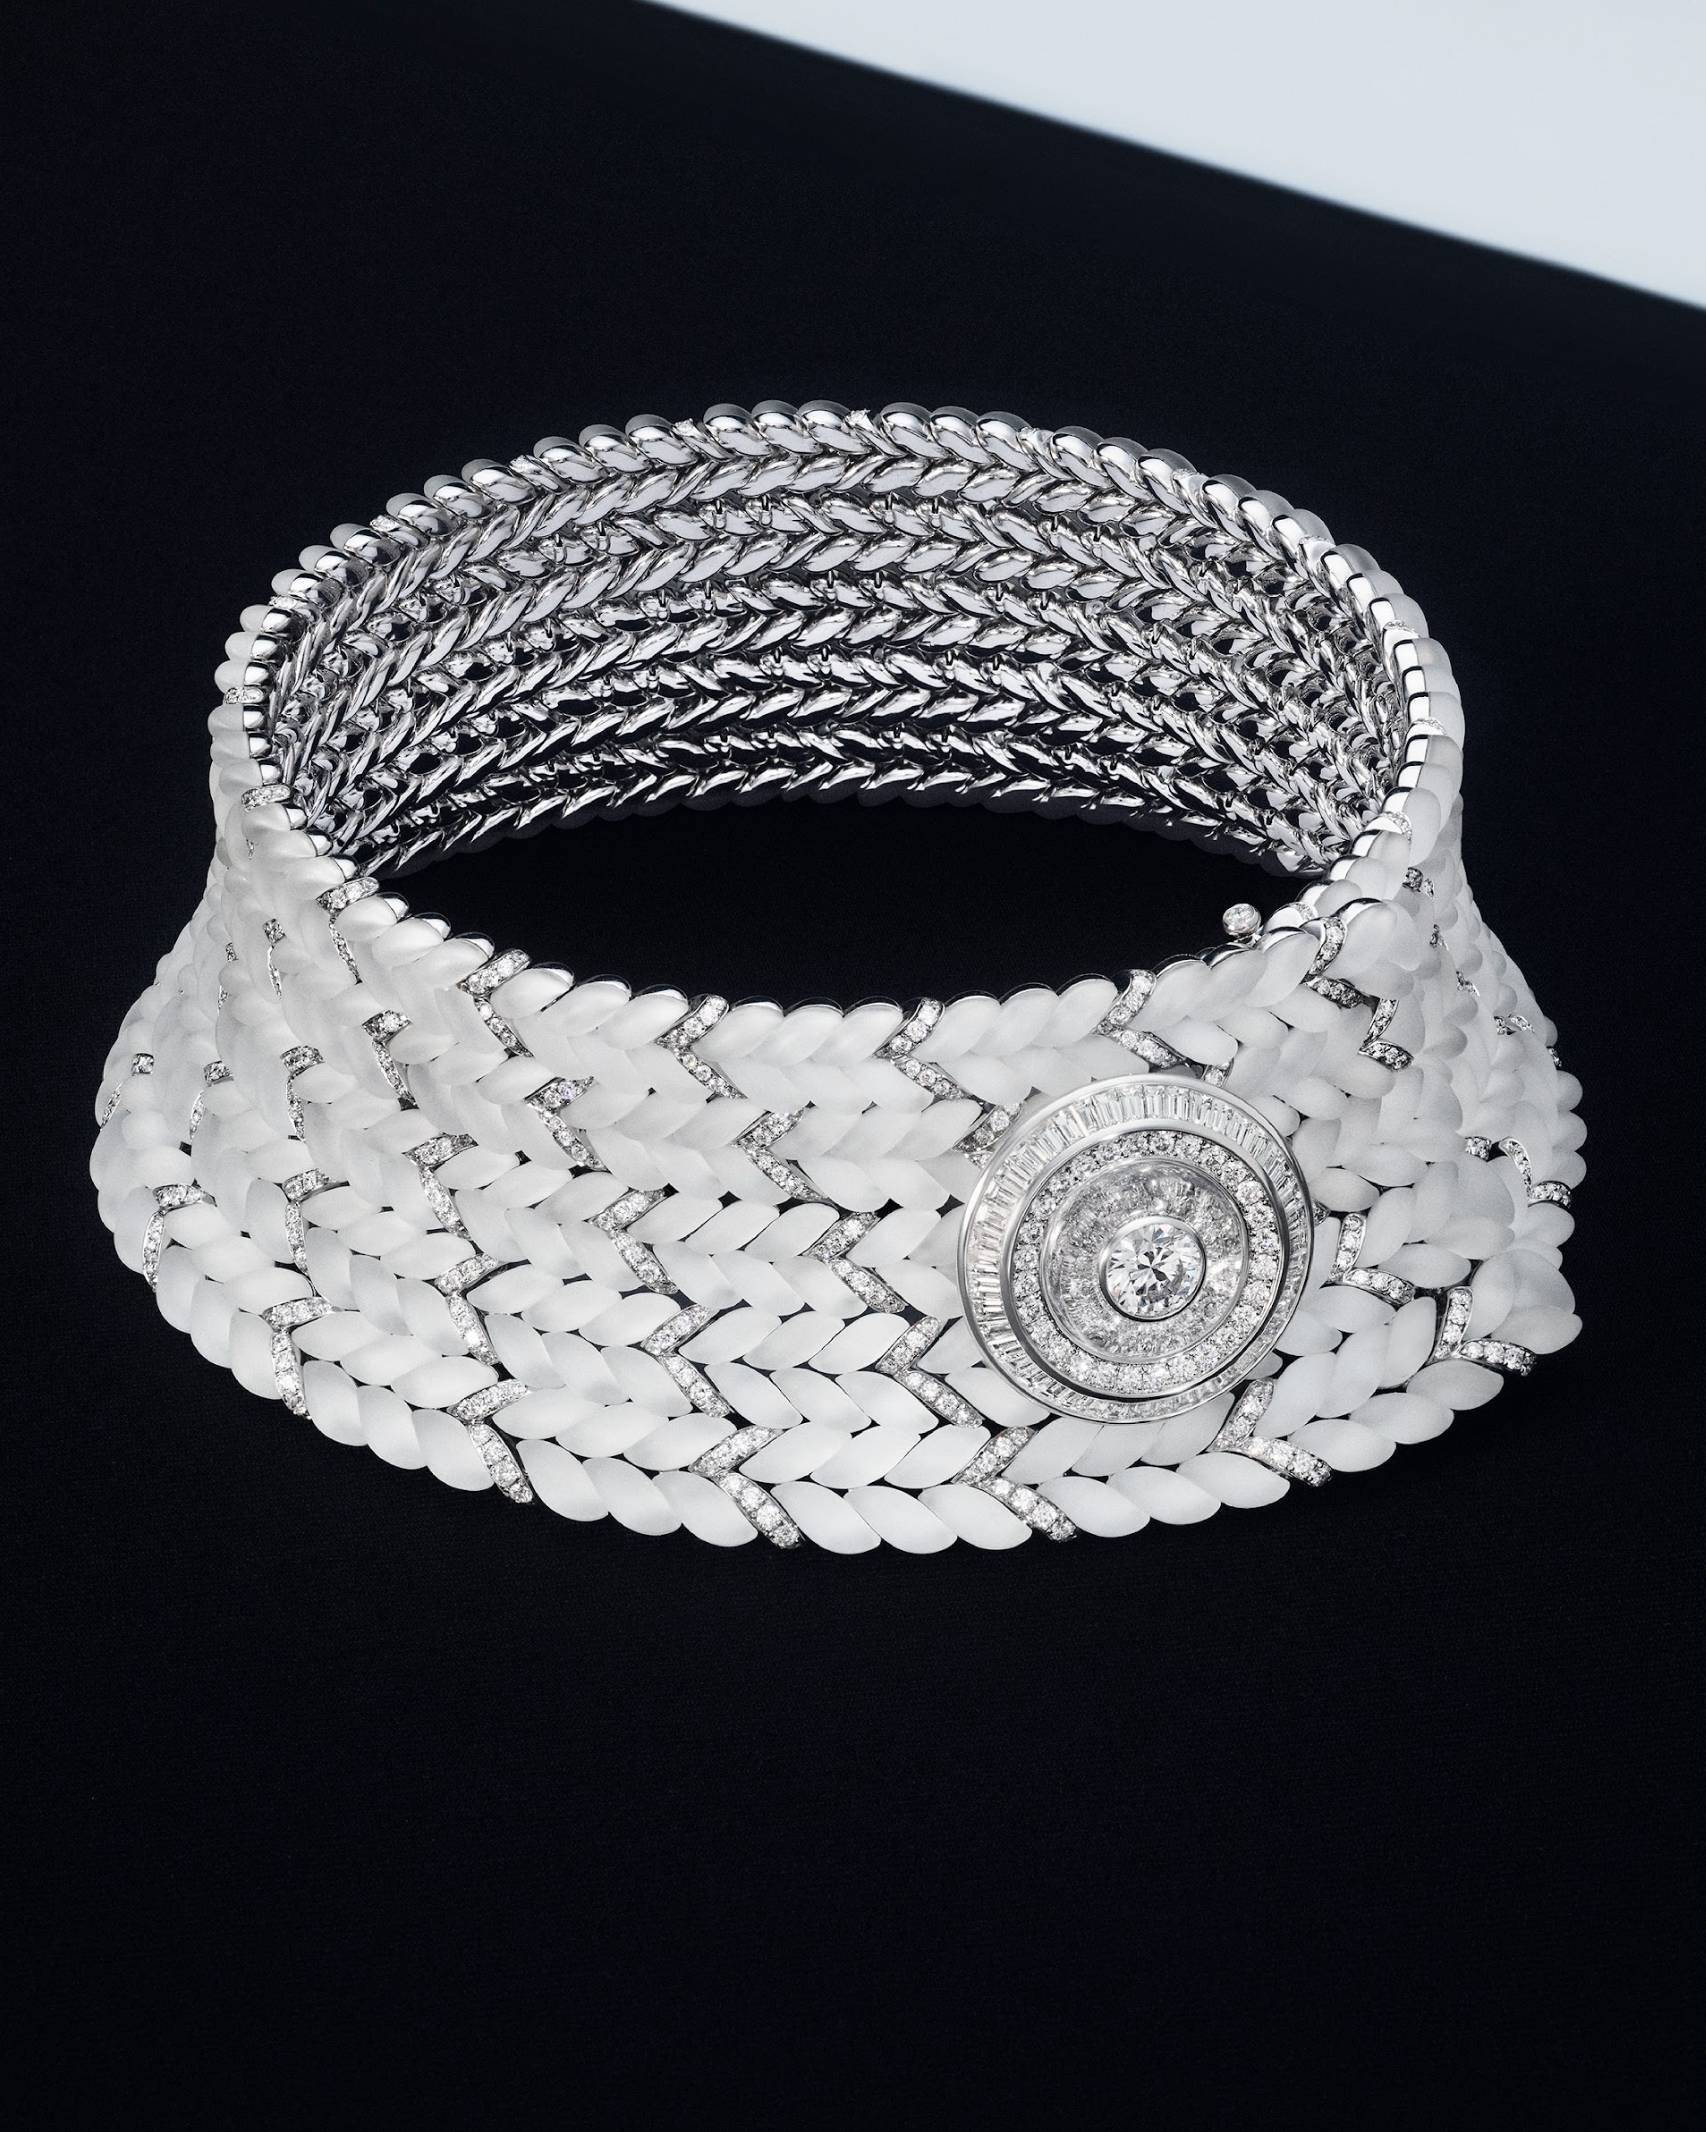 Tricot necklace set with a 2.01 ct round diamond and rock crystal, paved with diamonds, in gold（圖片來源：BOUCHERON）